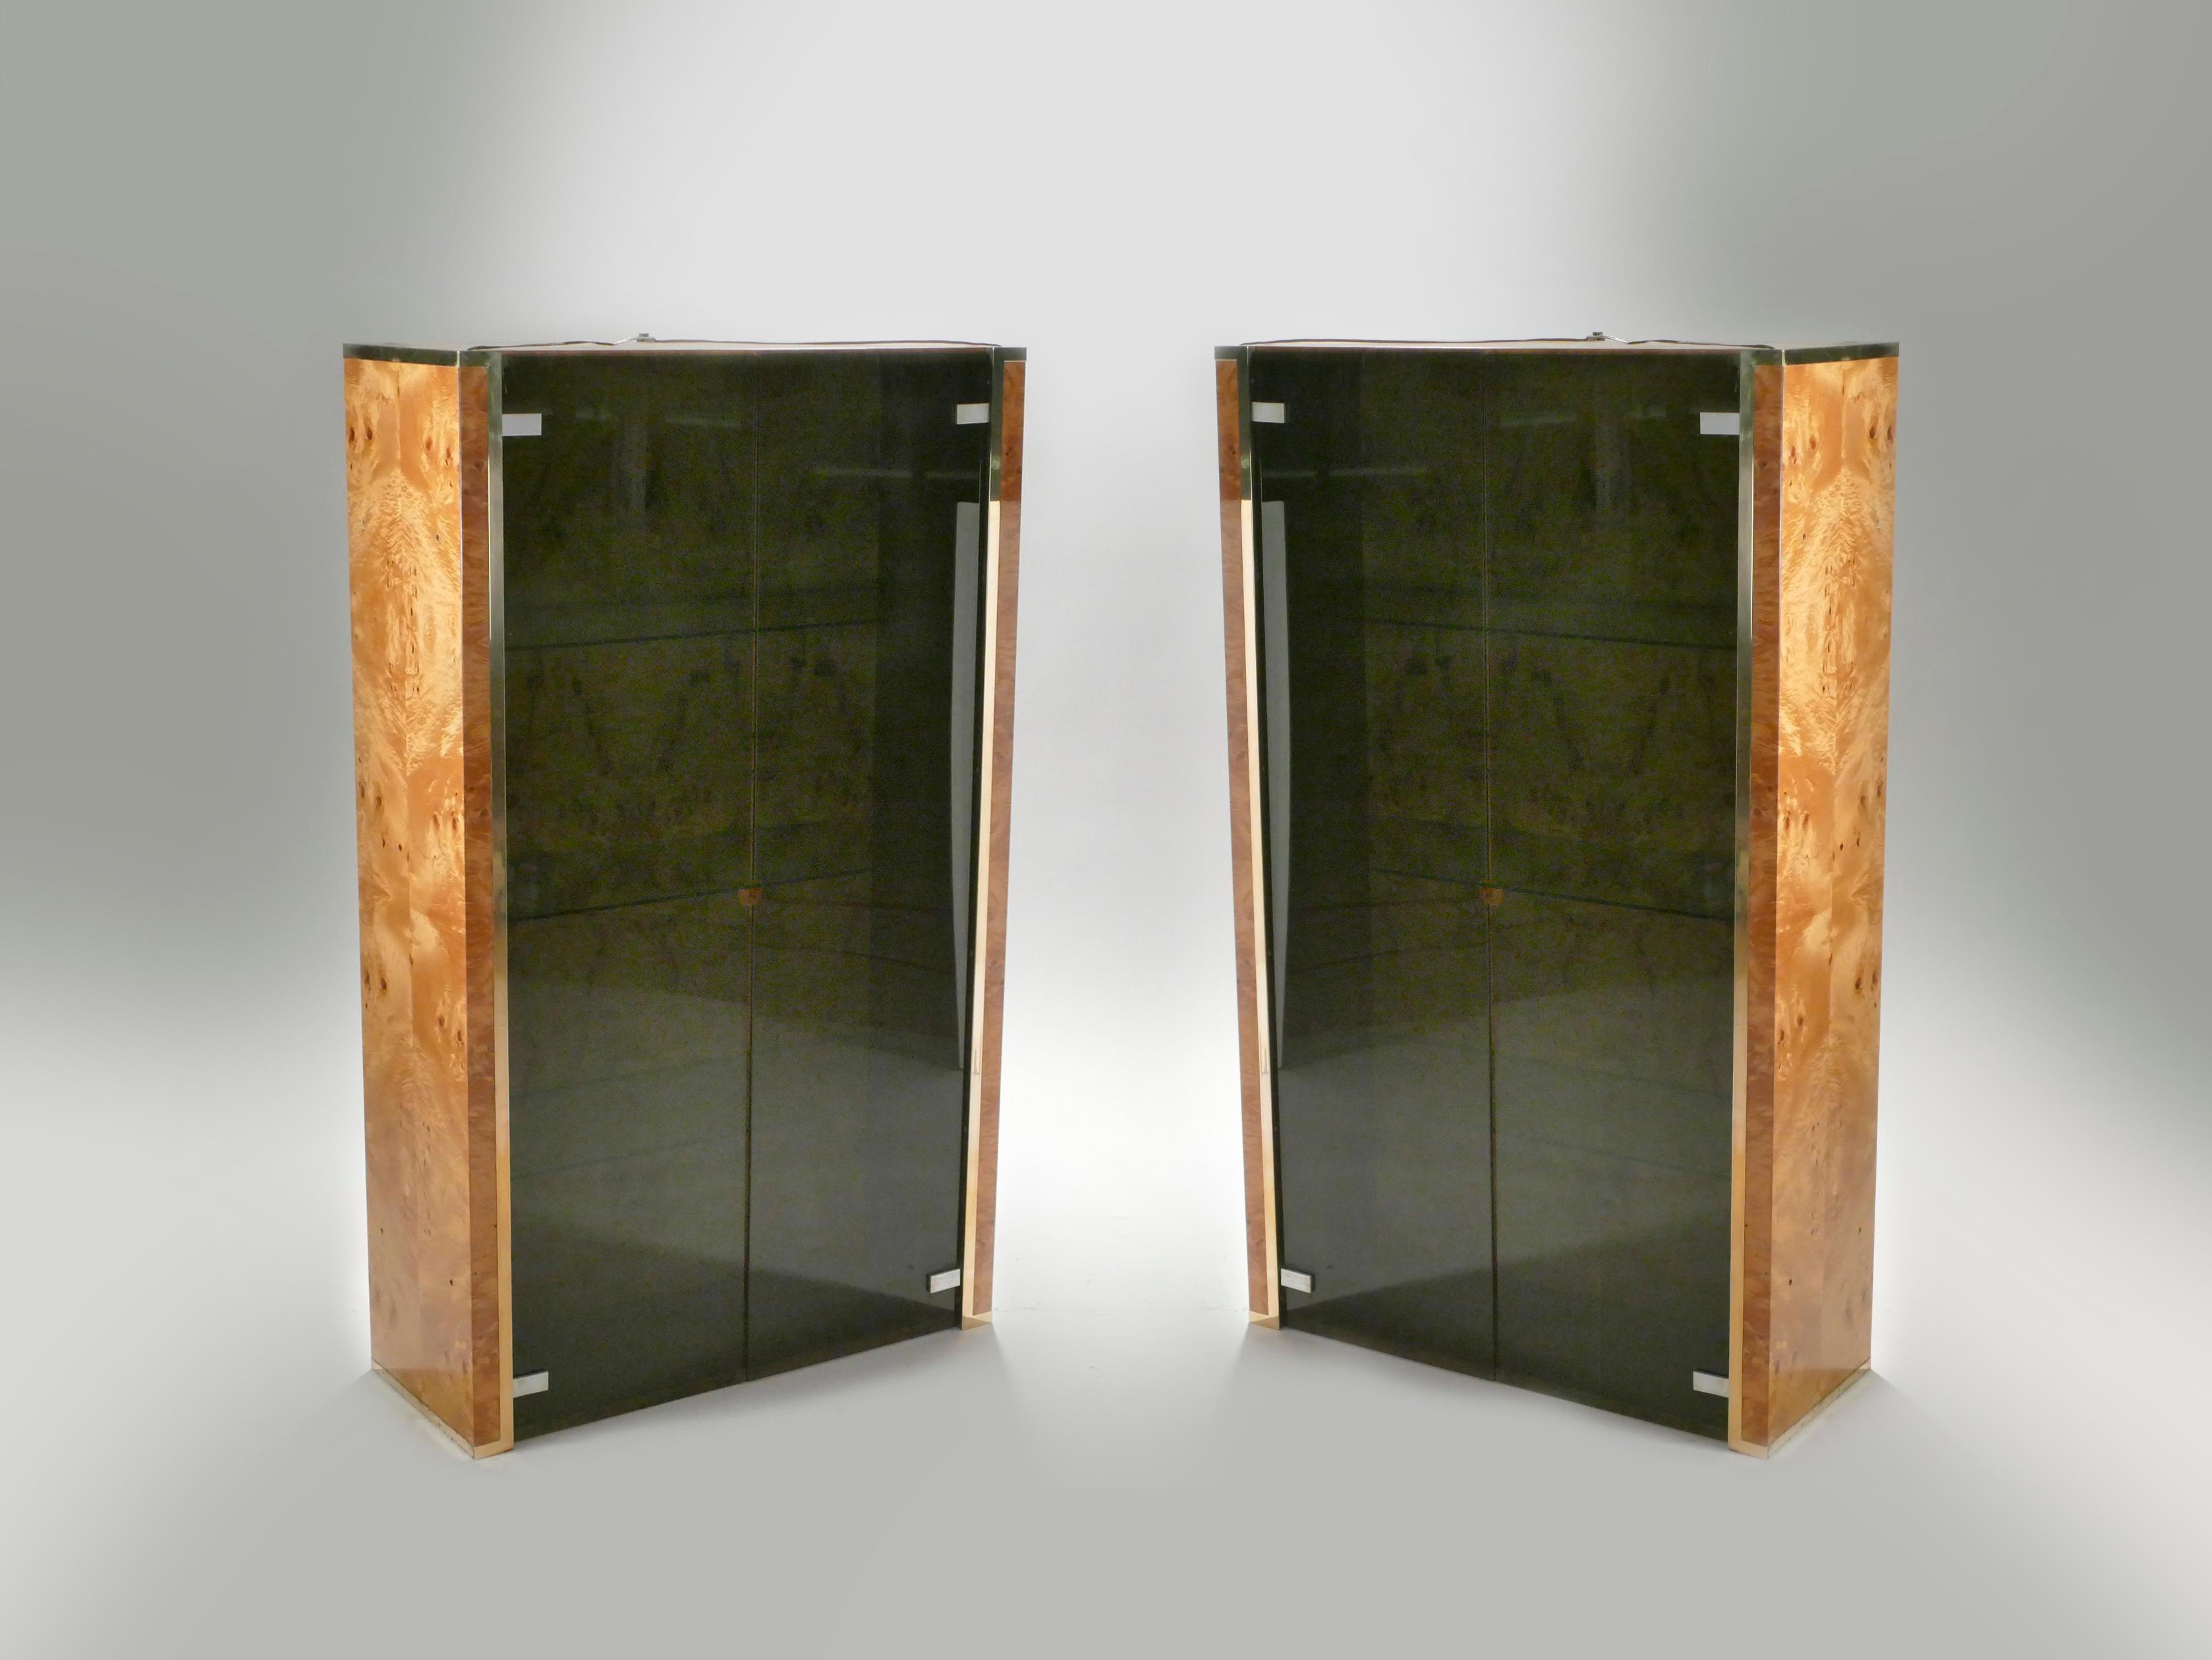 This bright vitrine was designed by Jean-Claude Mahey and is typical of his 1970s work. The body of the piece is made from sunny, caramel-colored burlwood, and the doors are a fine glass. A brass border runs along the bottom of the piece, giving it